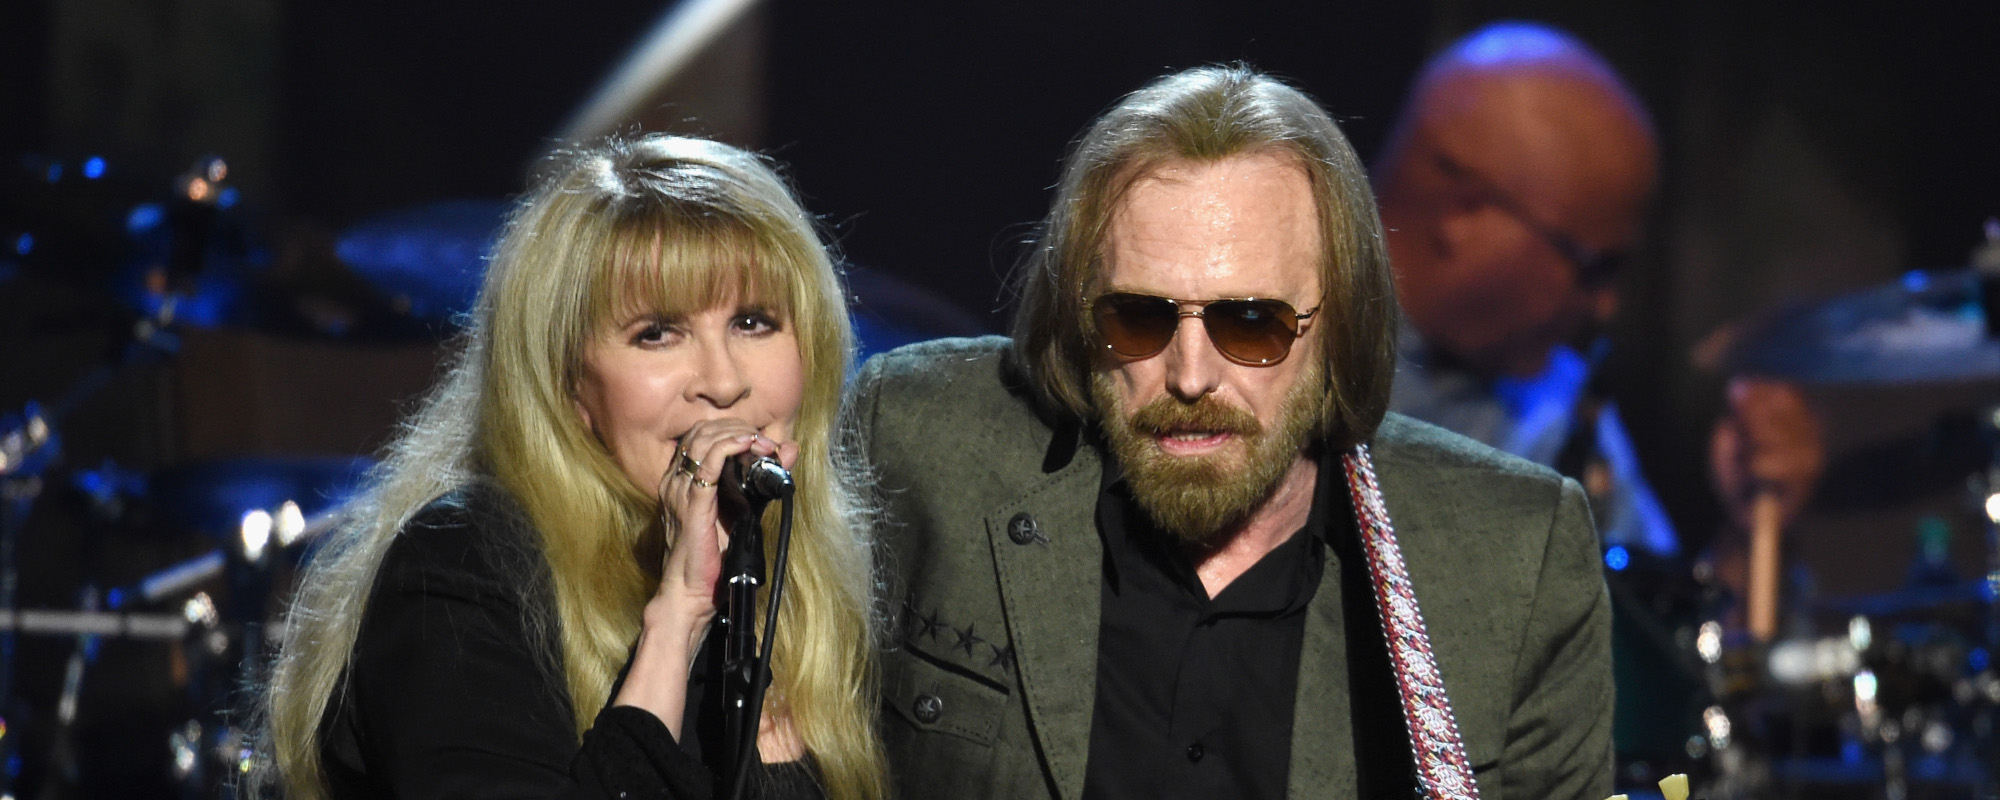 Why Stevie Nicks Passed on Tom Petty and the Heartbreakers’ 1985 Hit “Don’t Come Around Here No More”